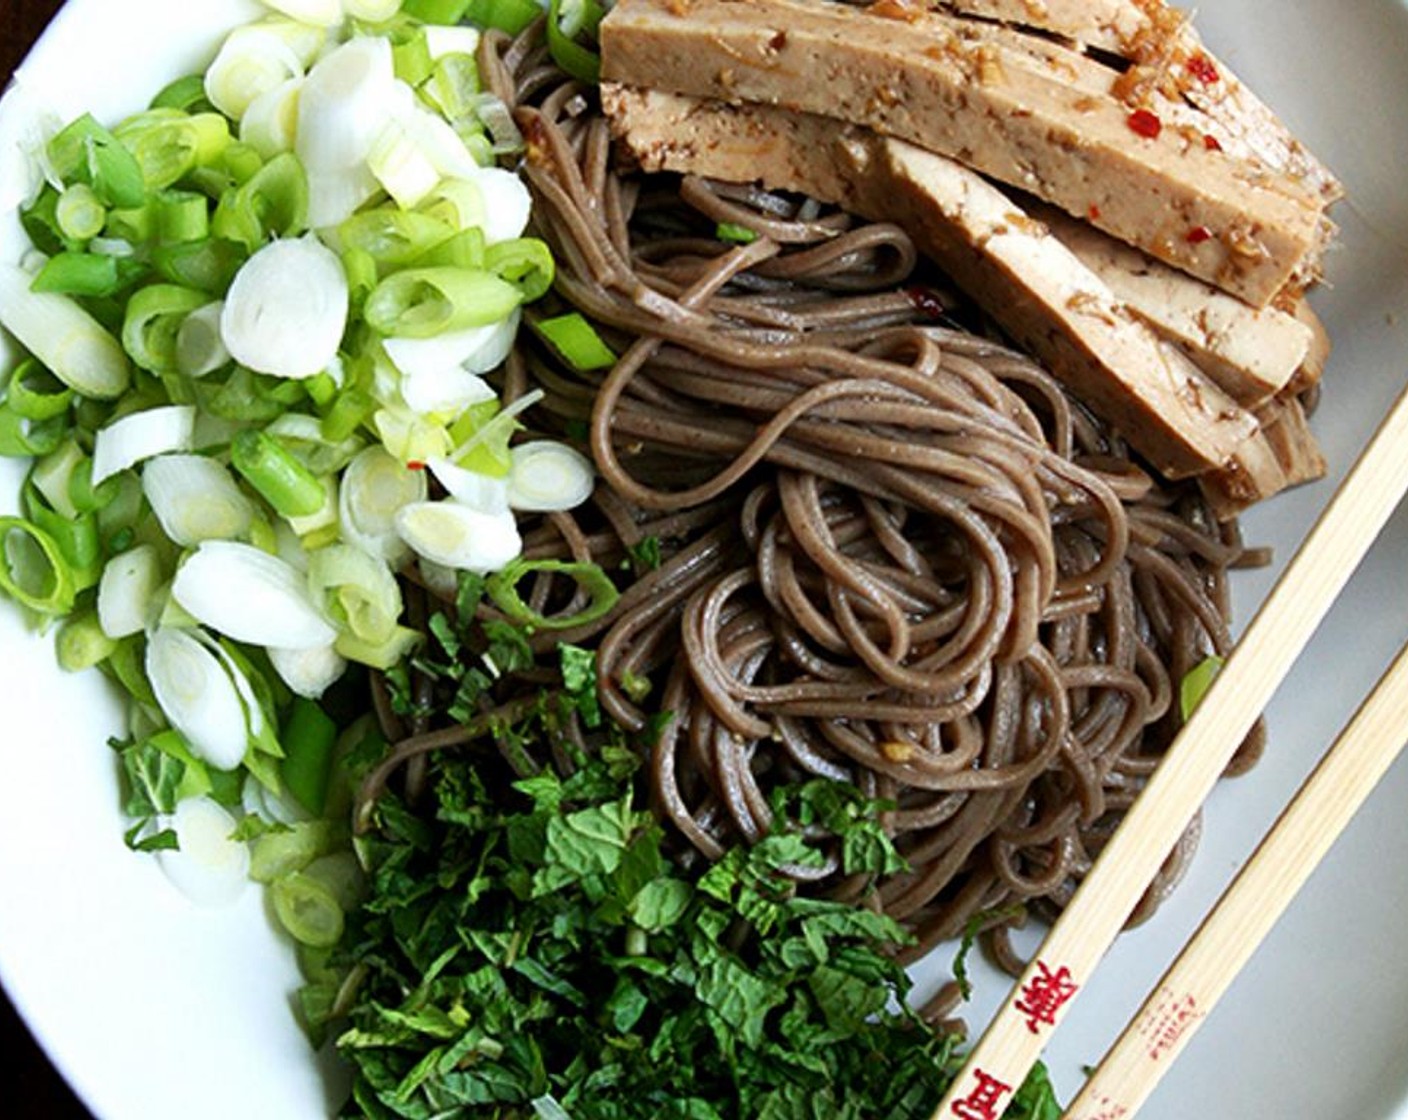 step 10 At this point, you can serve the salad however you wish. Toss the noodles with the dressing so that the noodles are nicely coated. Divide noodles among bowls. Top each bowl with scallions, mint and tofu. Serve with Sriracha on the side. Enjoy!